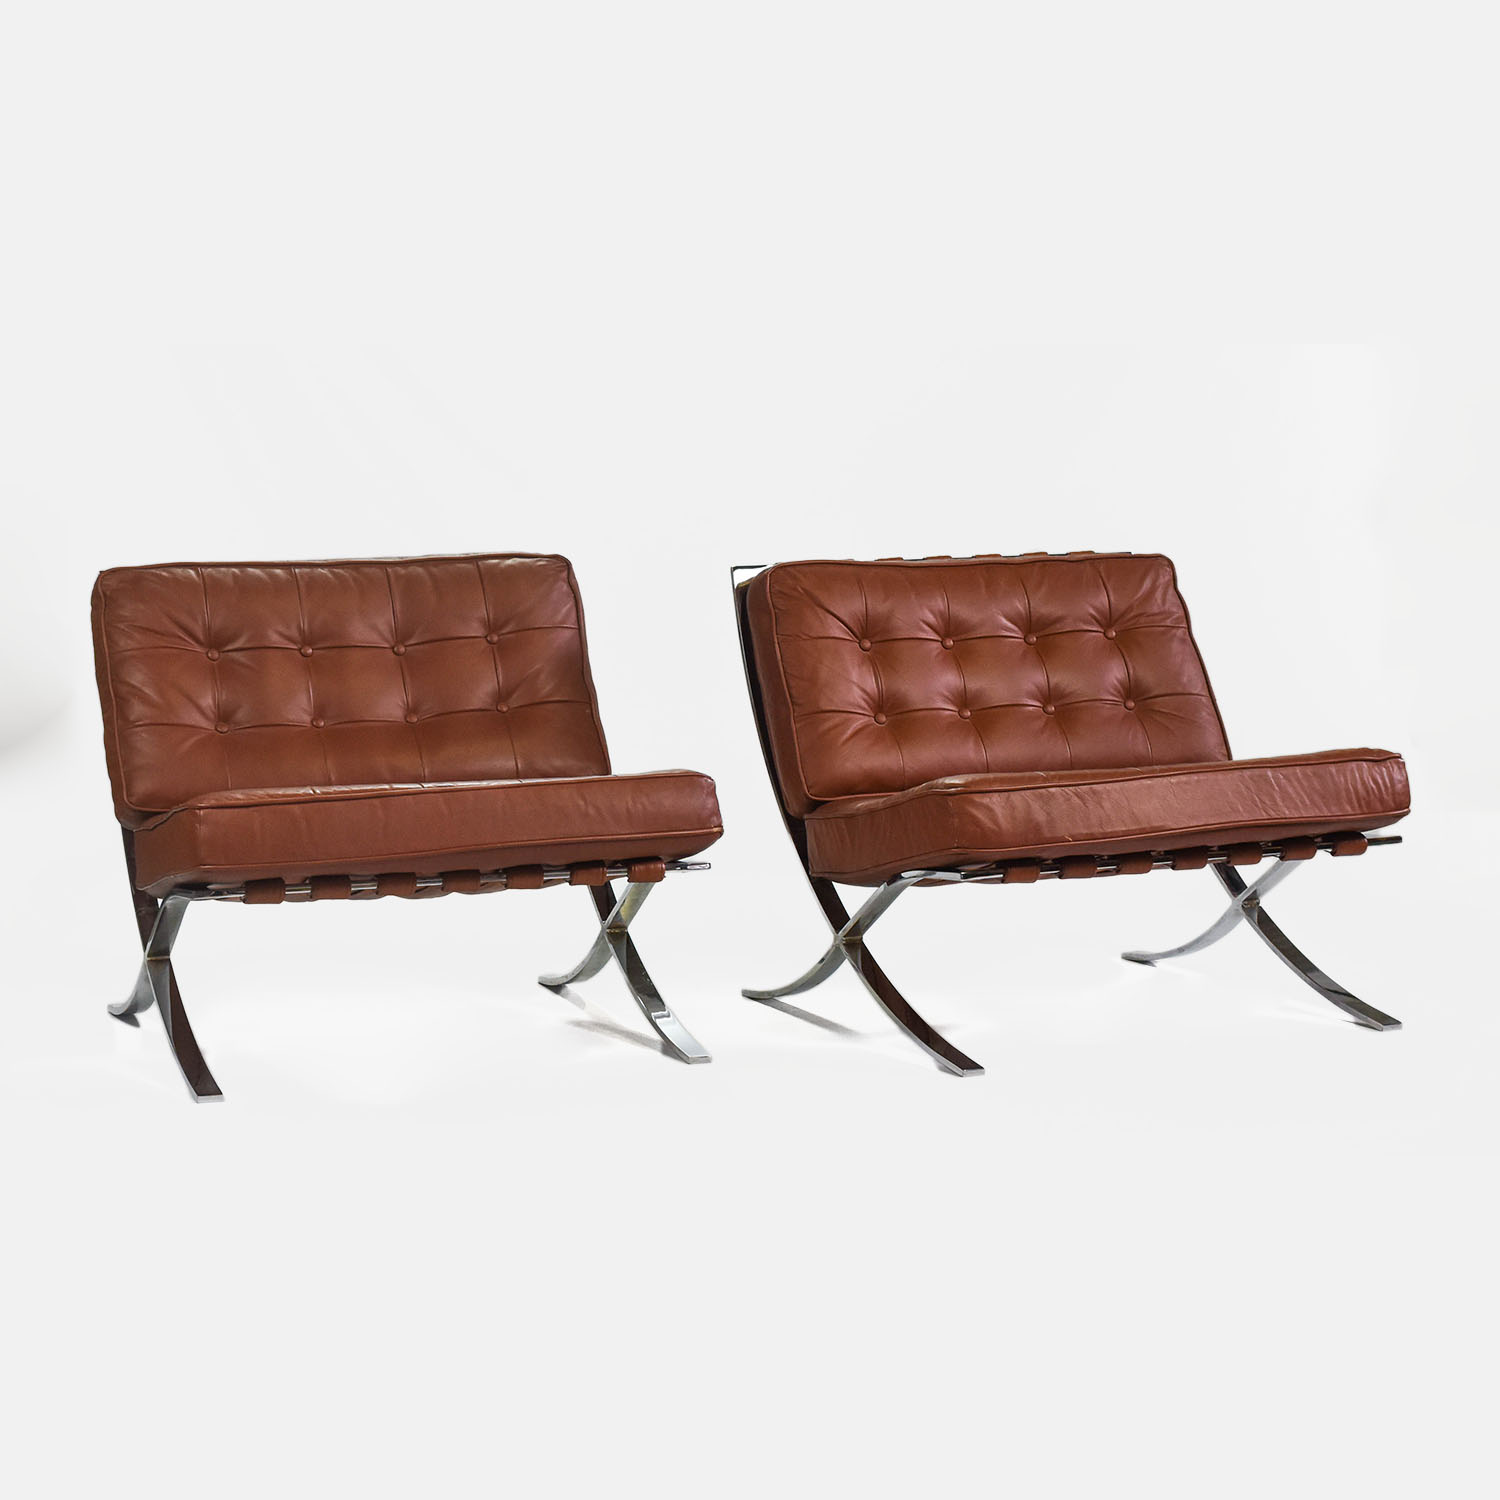 Two Knoll Modernist Metal and Leather Barcelona Chairs